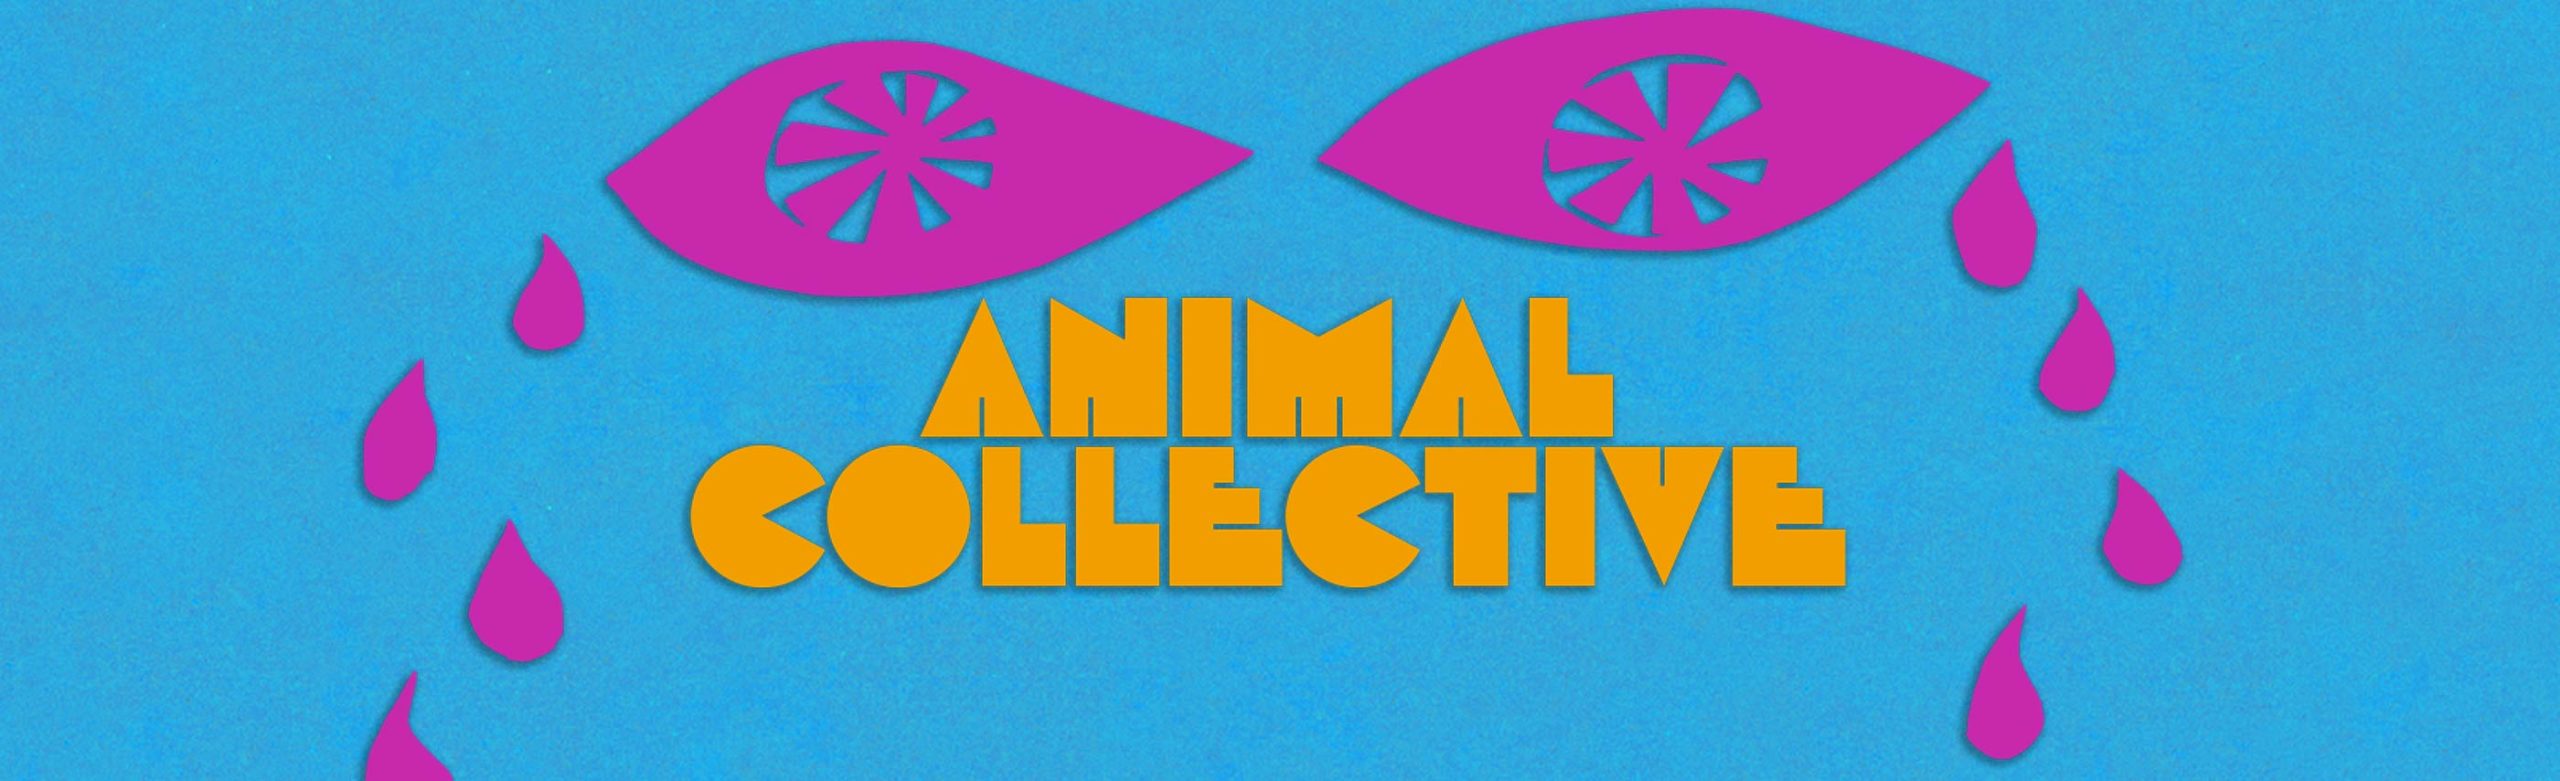 Event Info: Animal Collective at The Wilma 2022 Image